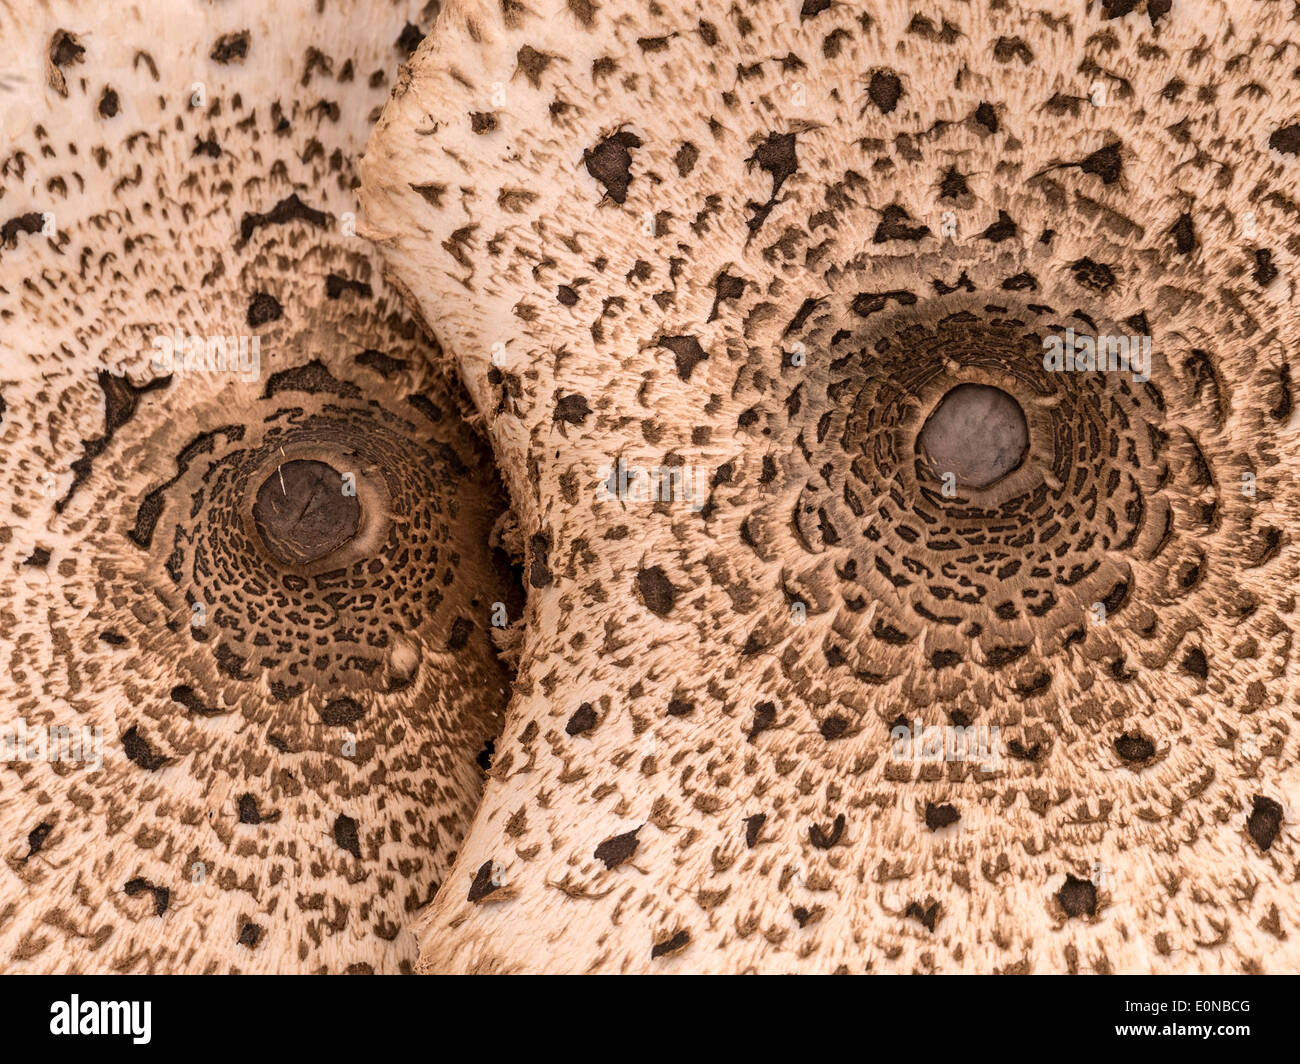 Close up view of two large overlapping parasol mushroom caps, Macrolepiota procera looking like a face with eyes. See E0NBGA. Stock Photo